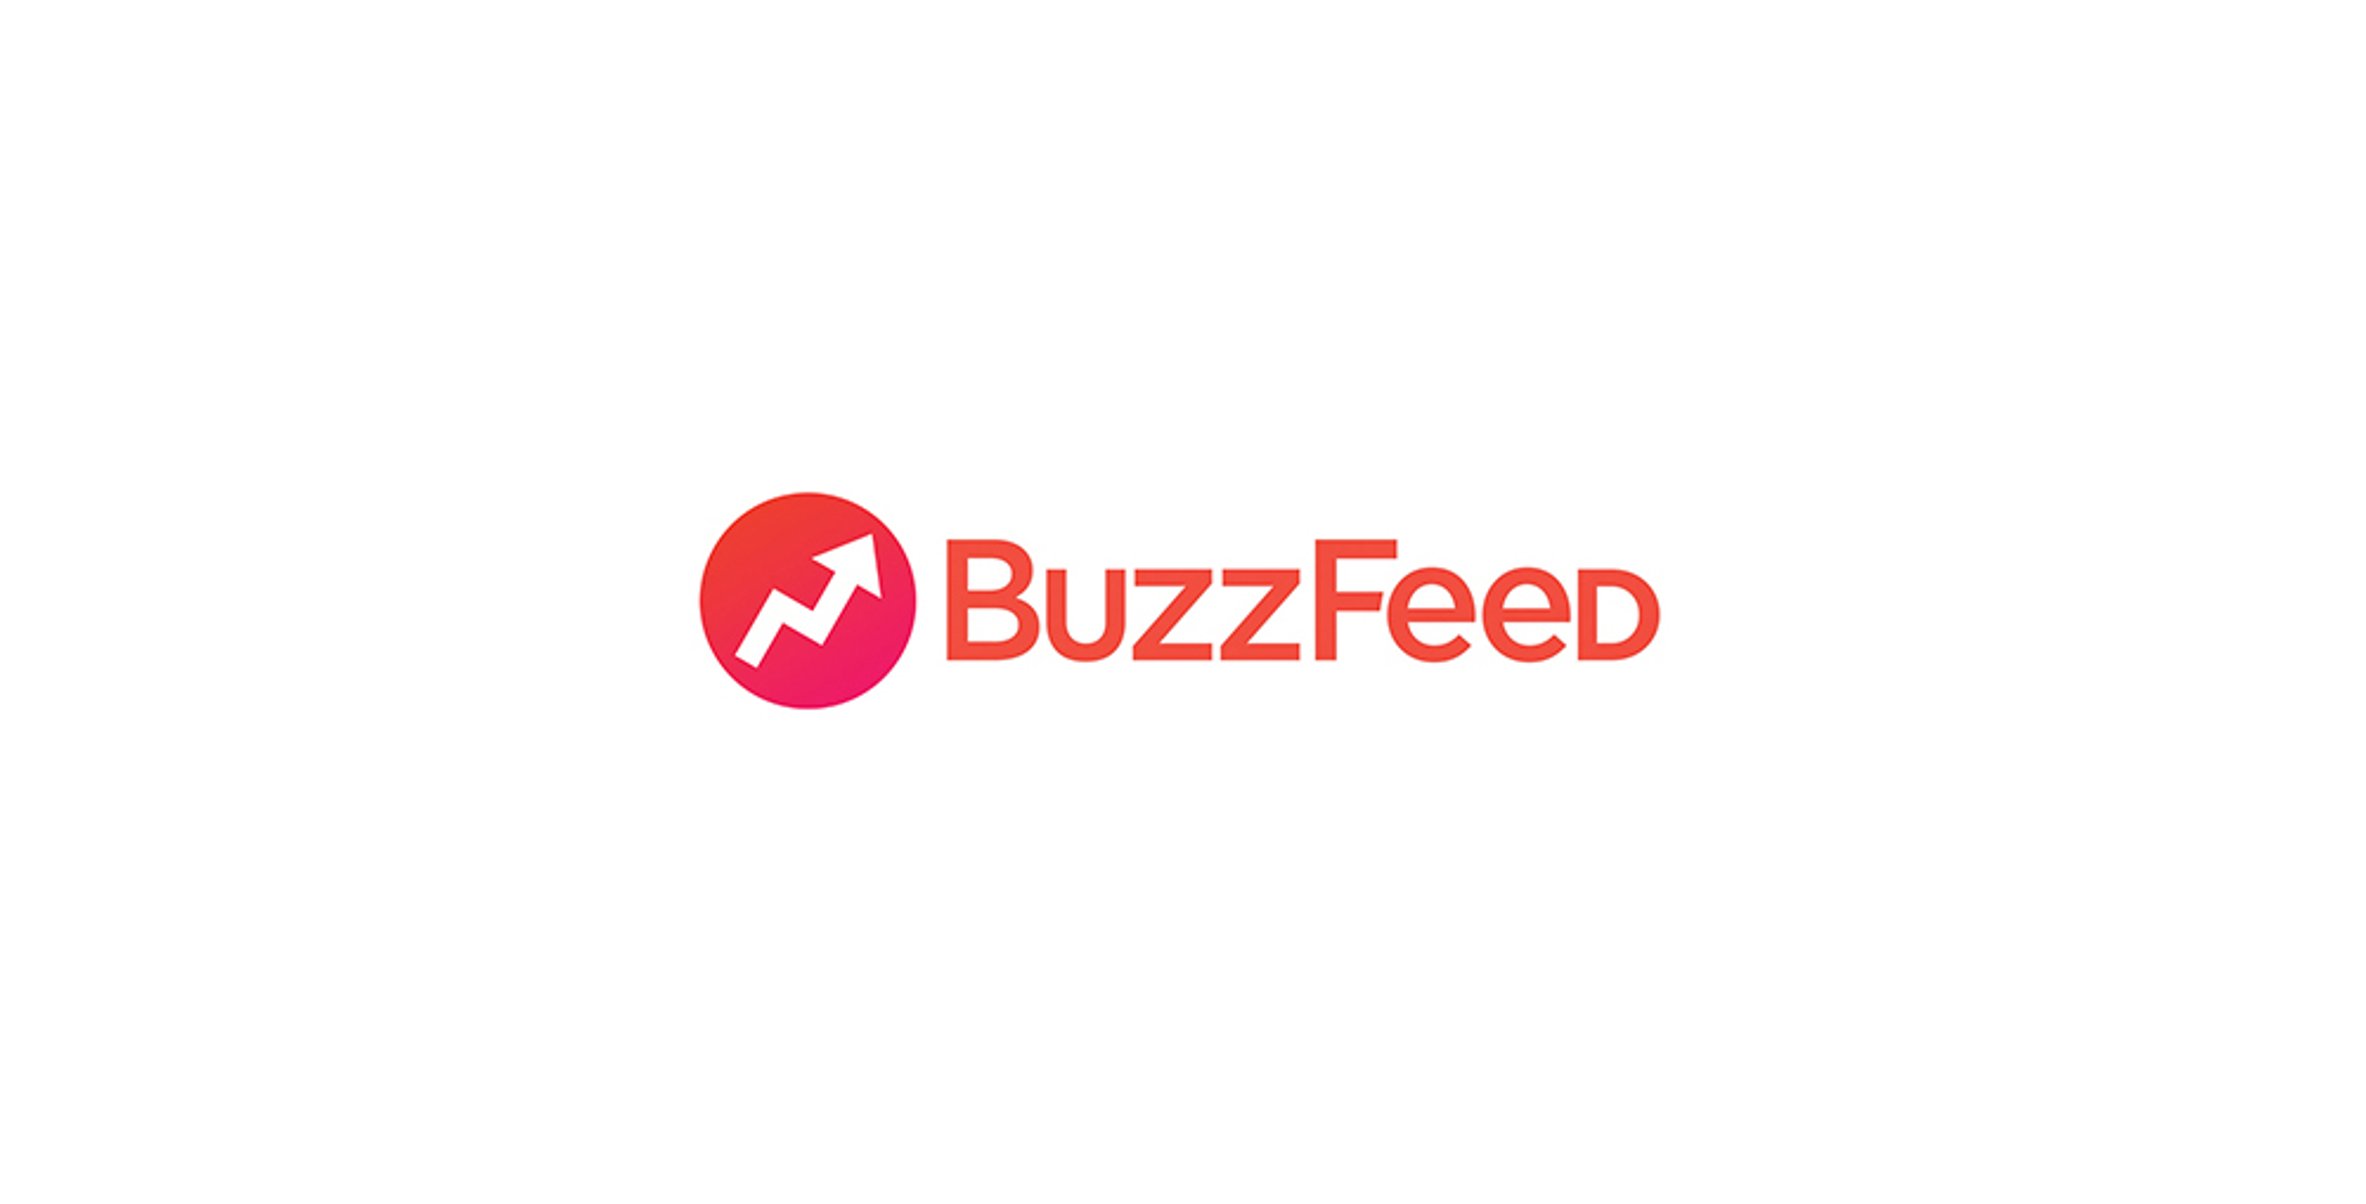 Seeking Black Parents with Adult Children For A BuzzFeed Cocoa Butter Brand Video!